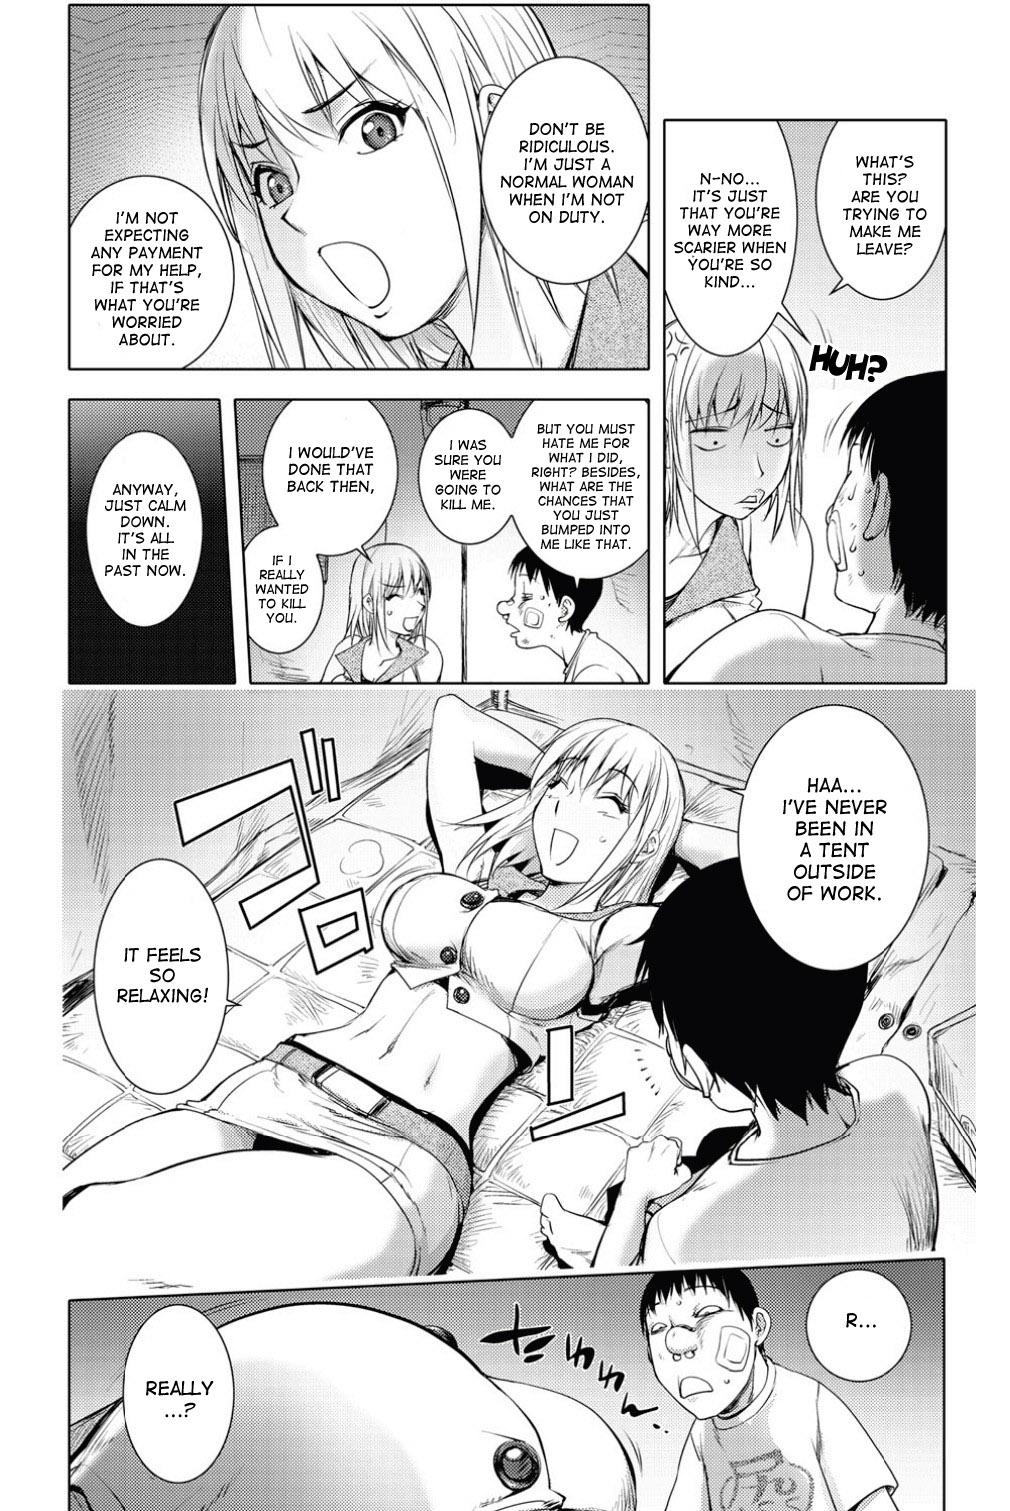 Bro Suicide Man’s Tent Ch.1-2 Hotwife - Page 4